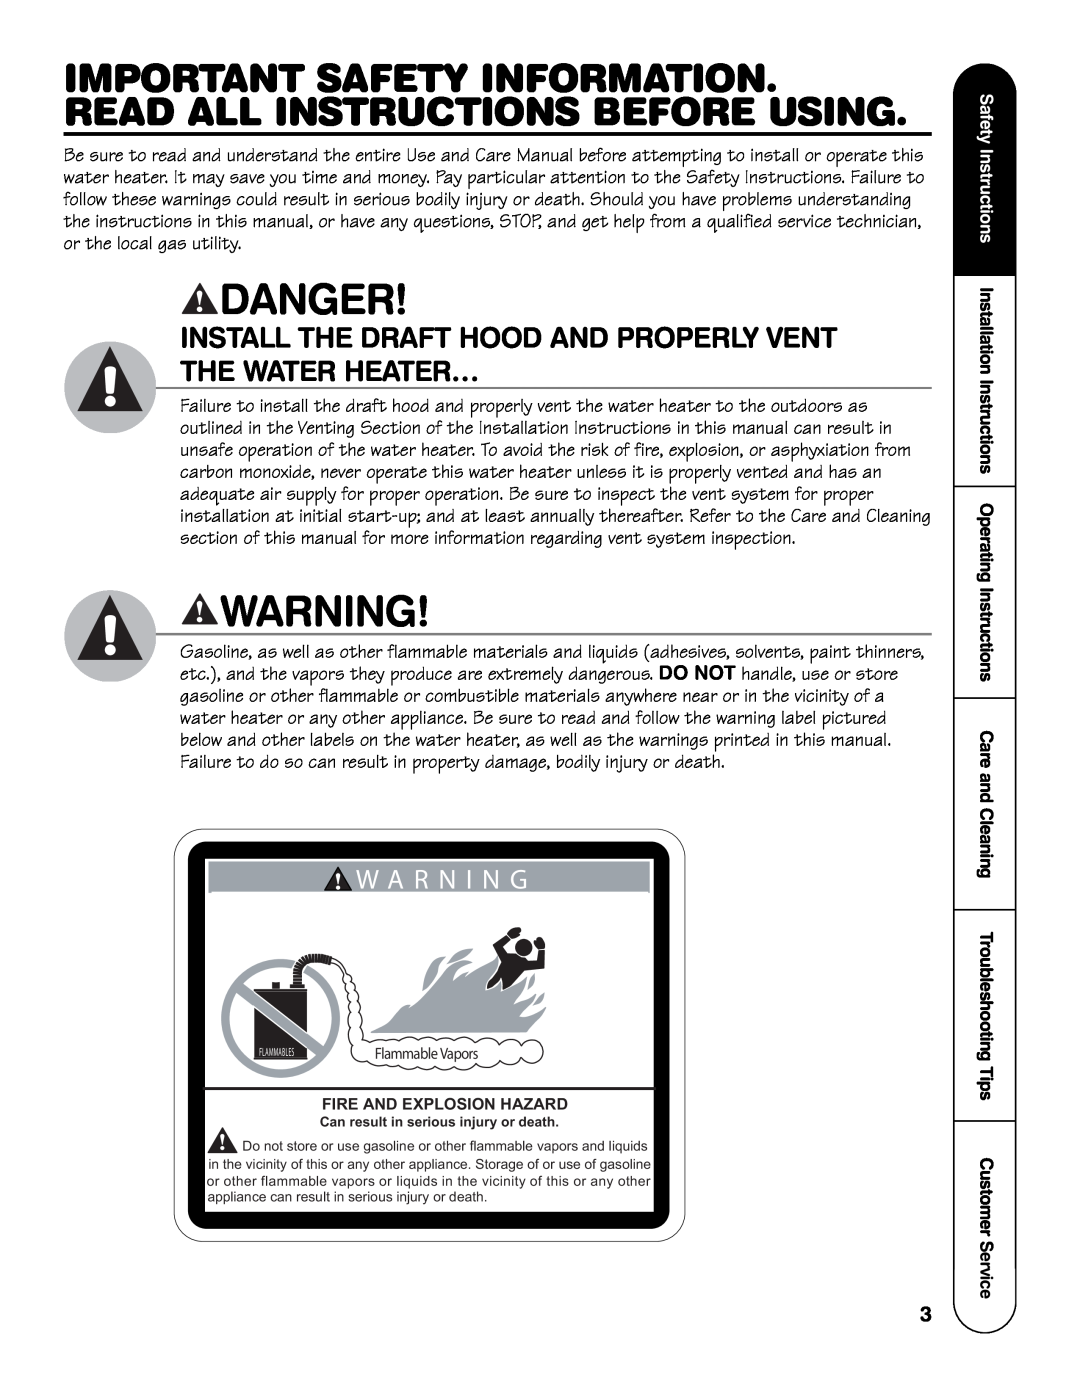 GE GP Series, SG Series, HG Series Danger, Important Safety Information. Read All Instructions Before Using, W A R N I N G 